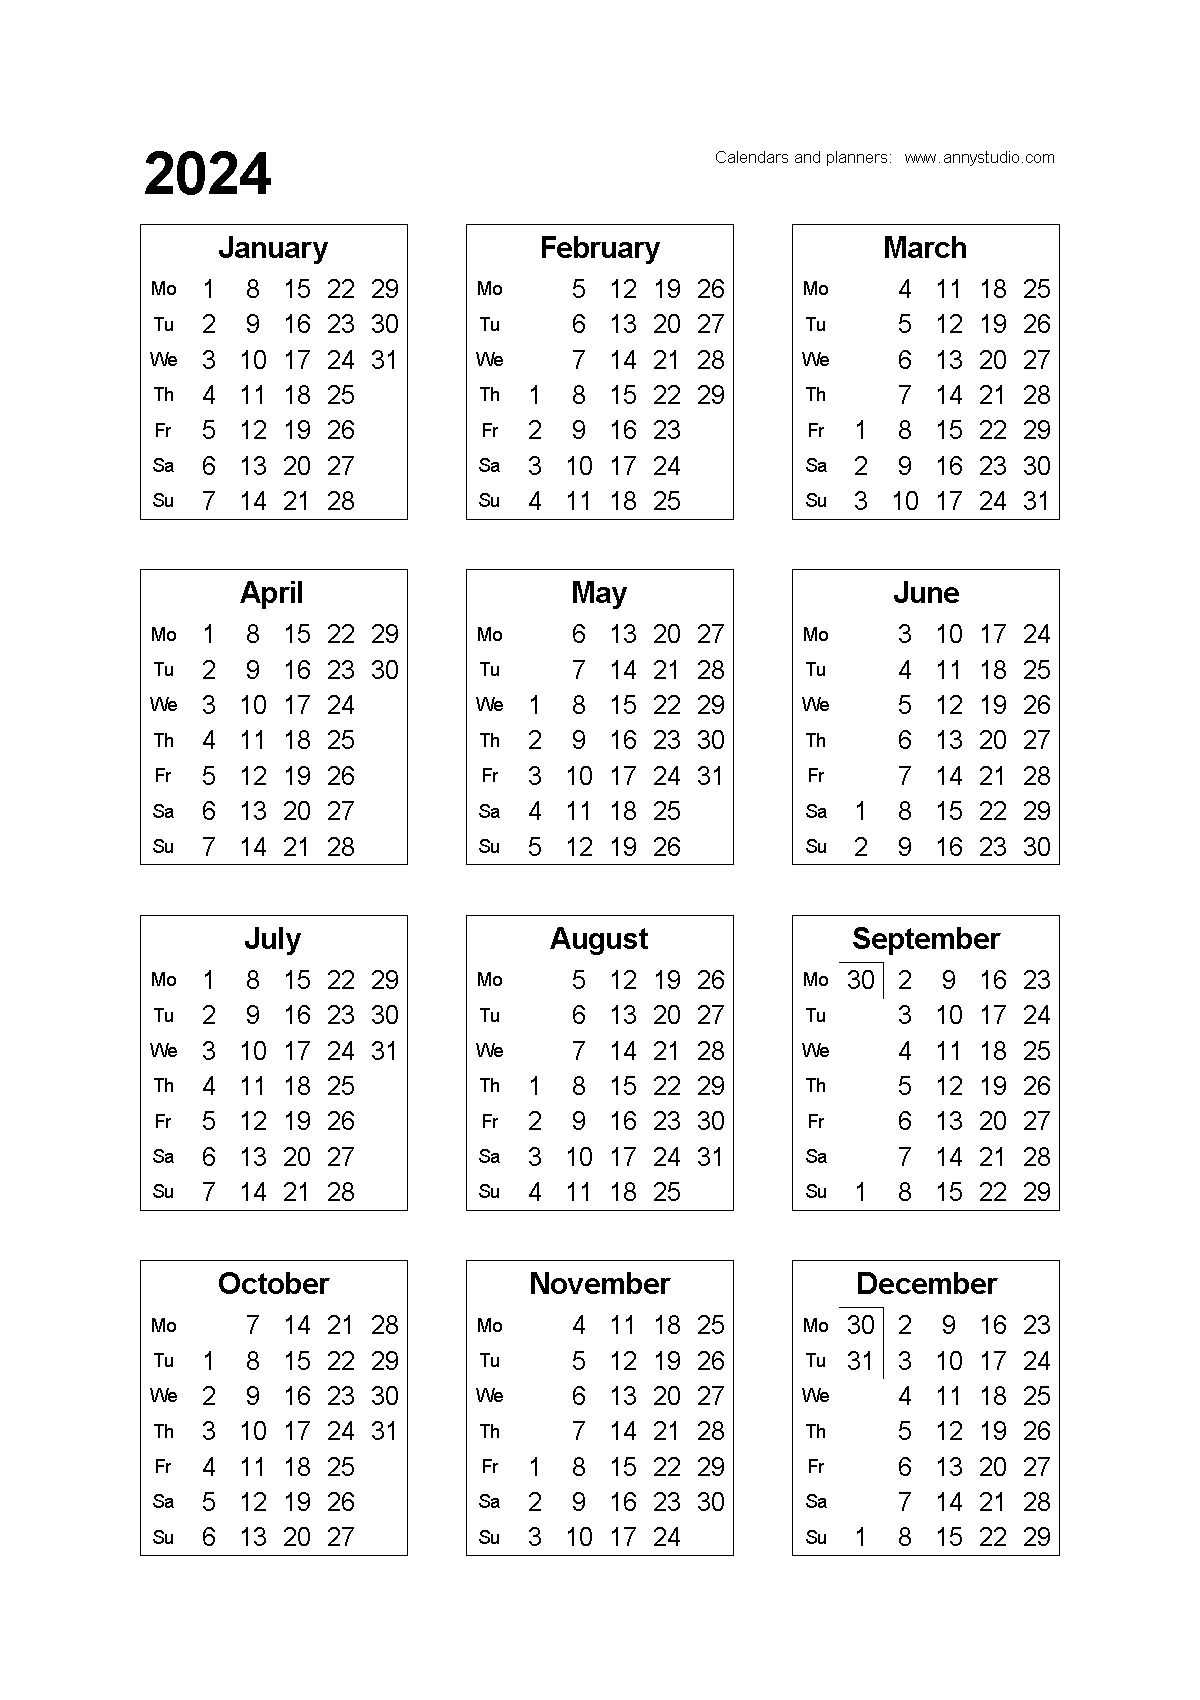 Free Printable Calendars And Planners 2023 And 2024 | Free | Free Printable Calendar 2024 Uk